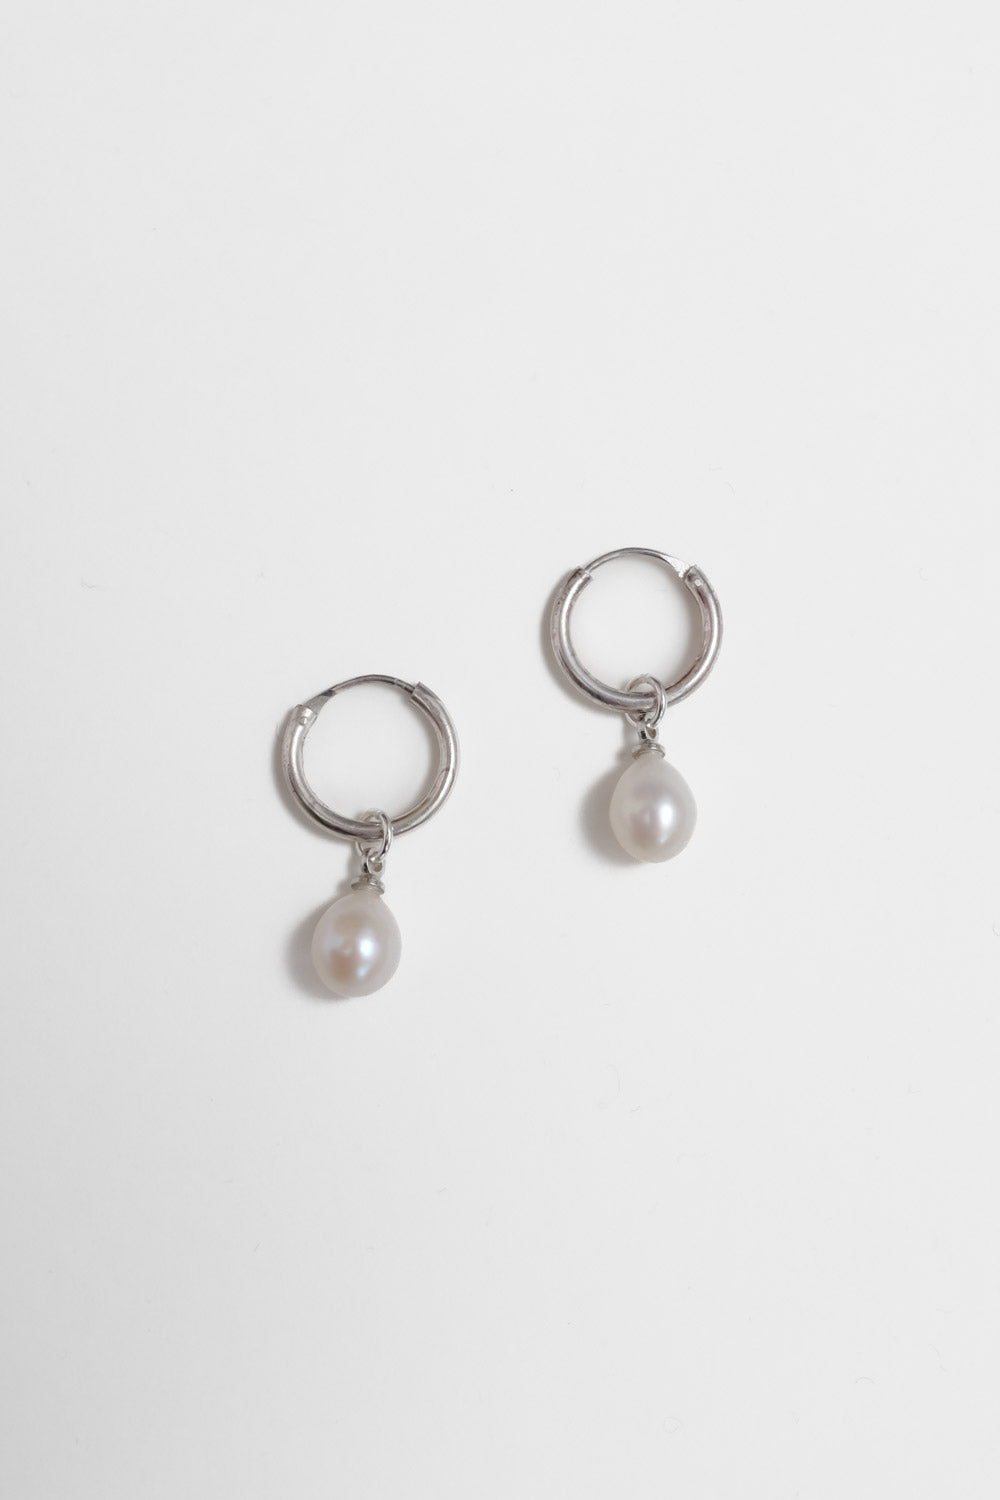 SMALL SILVER 925 HOOPS WITH VINTAGE PEARLS